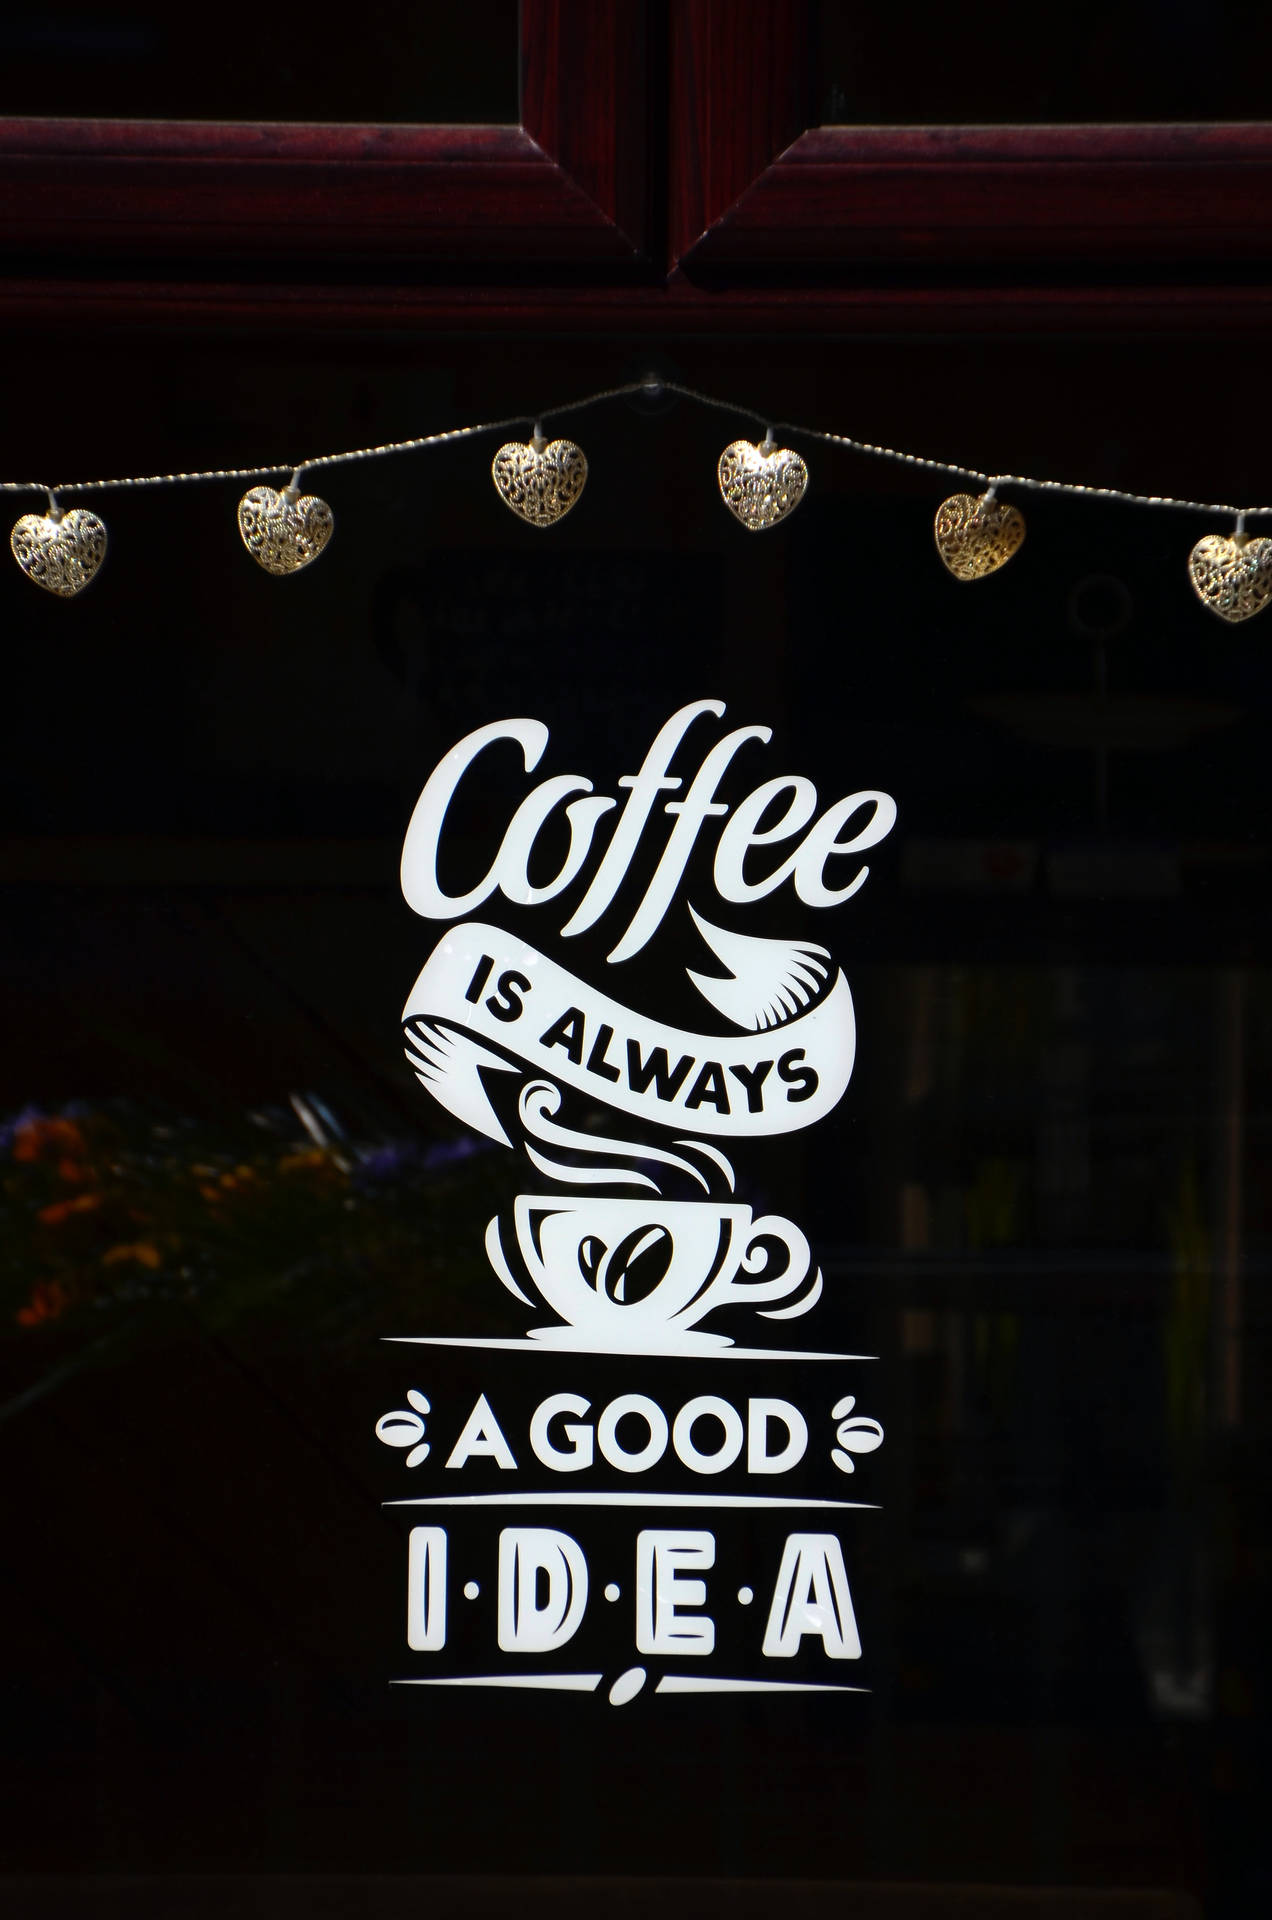 Positive Coffee Message Background